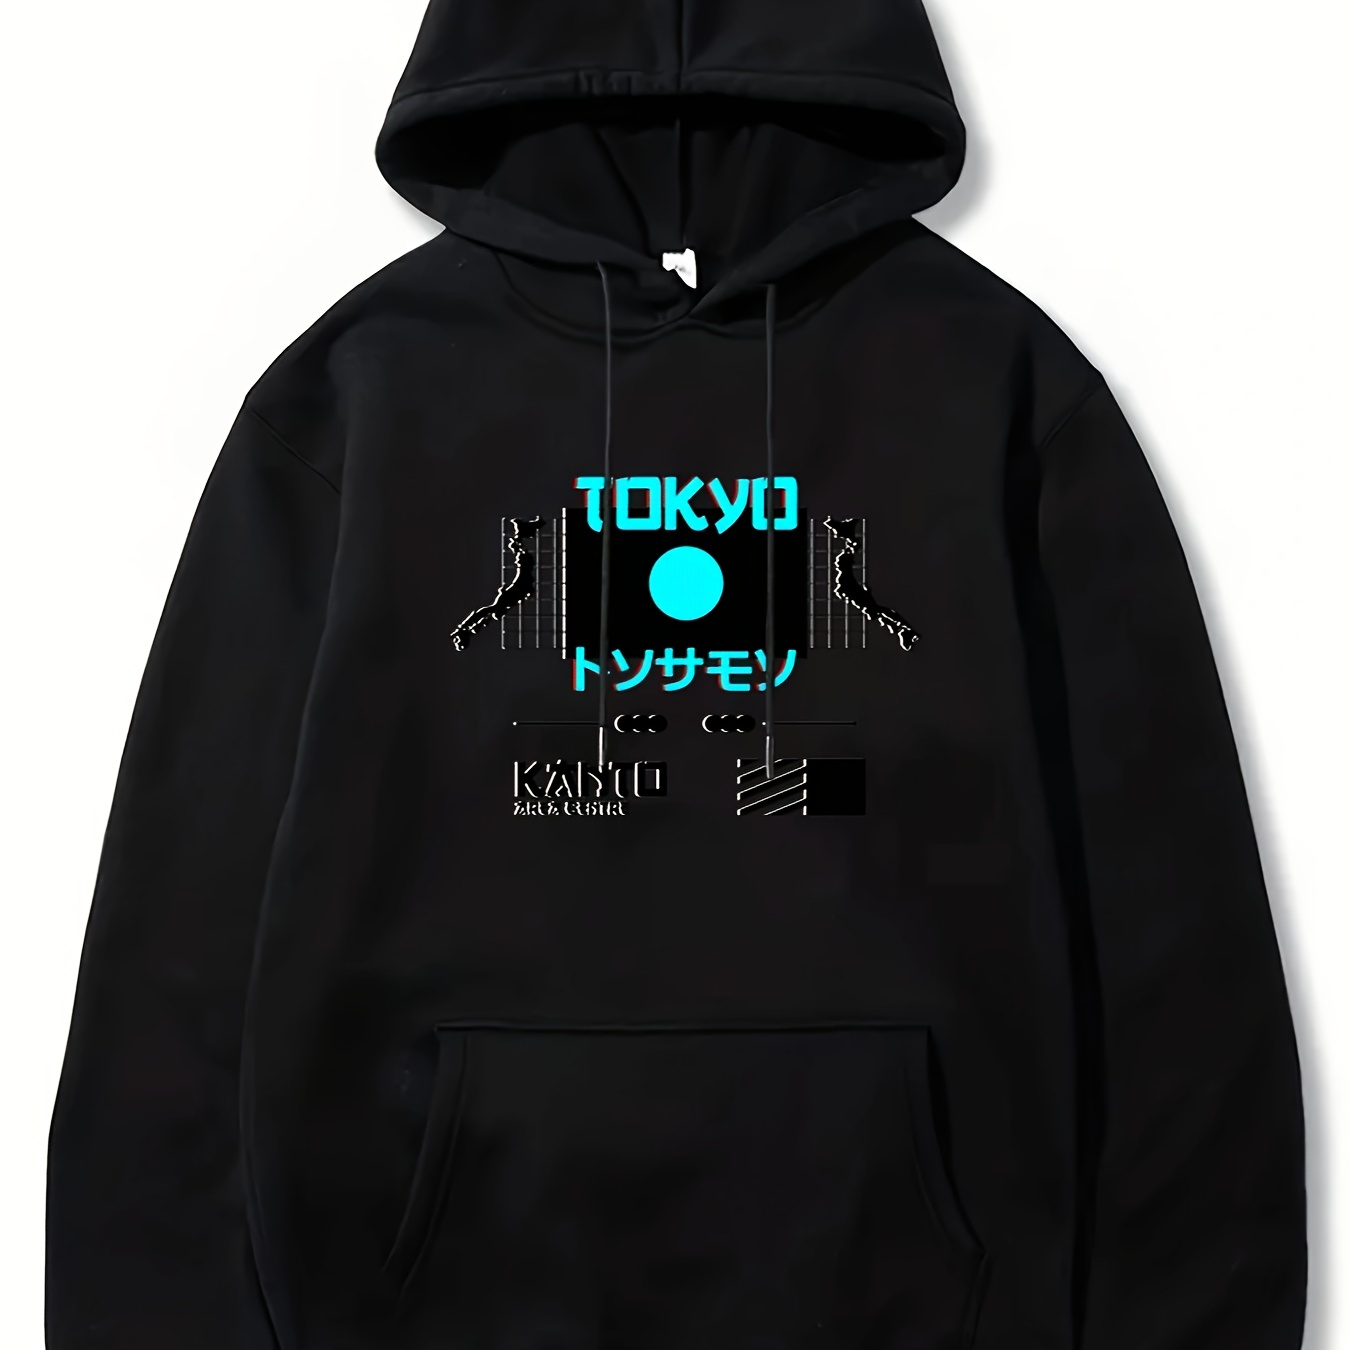 

Japanese Tokyo Print Men's Pullover Round Neck Hooded Sweatshirt Print Hoodie Casual Top For Autumn Winter Men's Clothing As Gifts